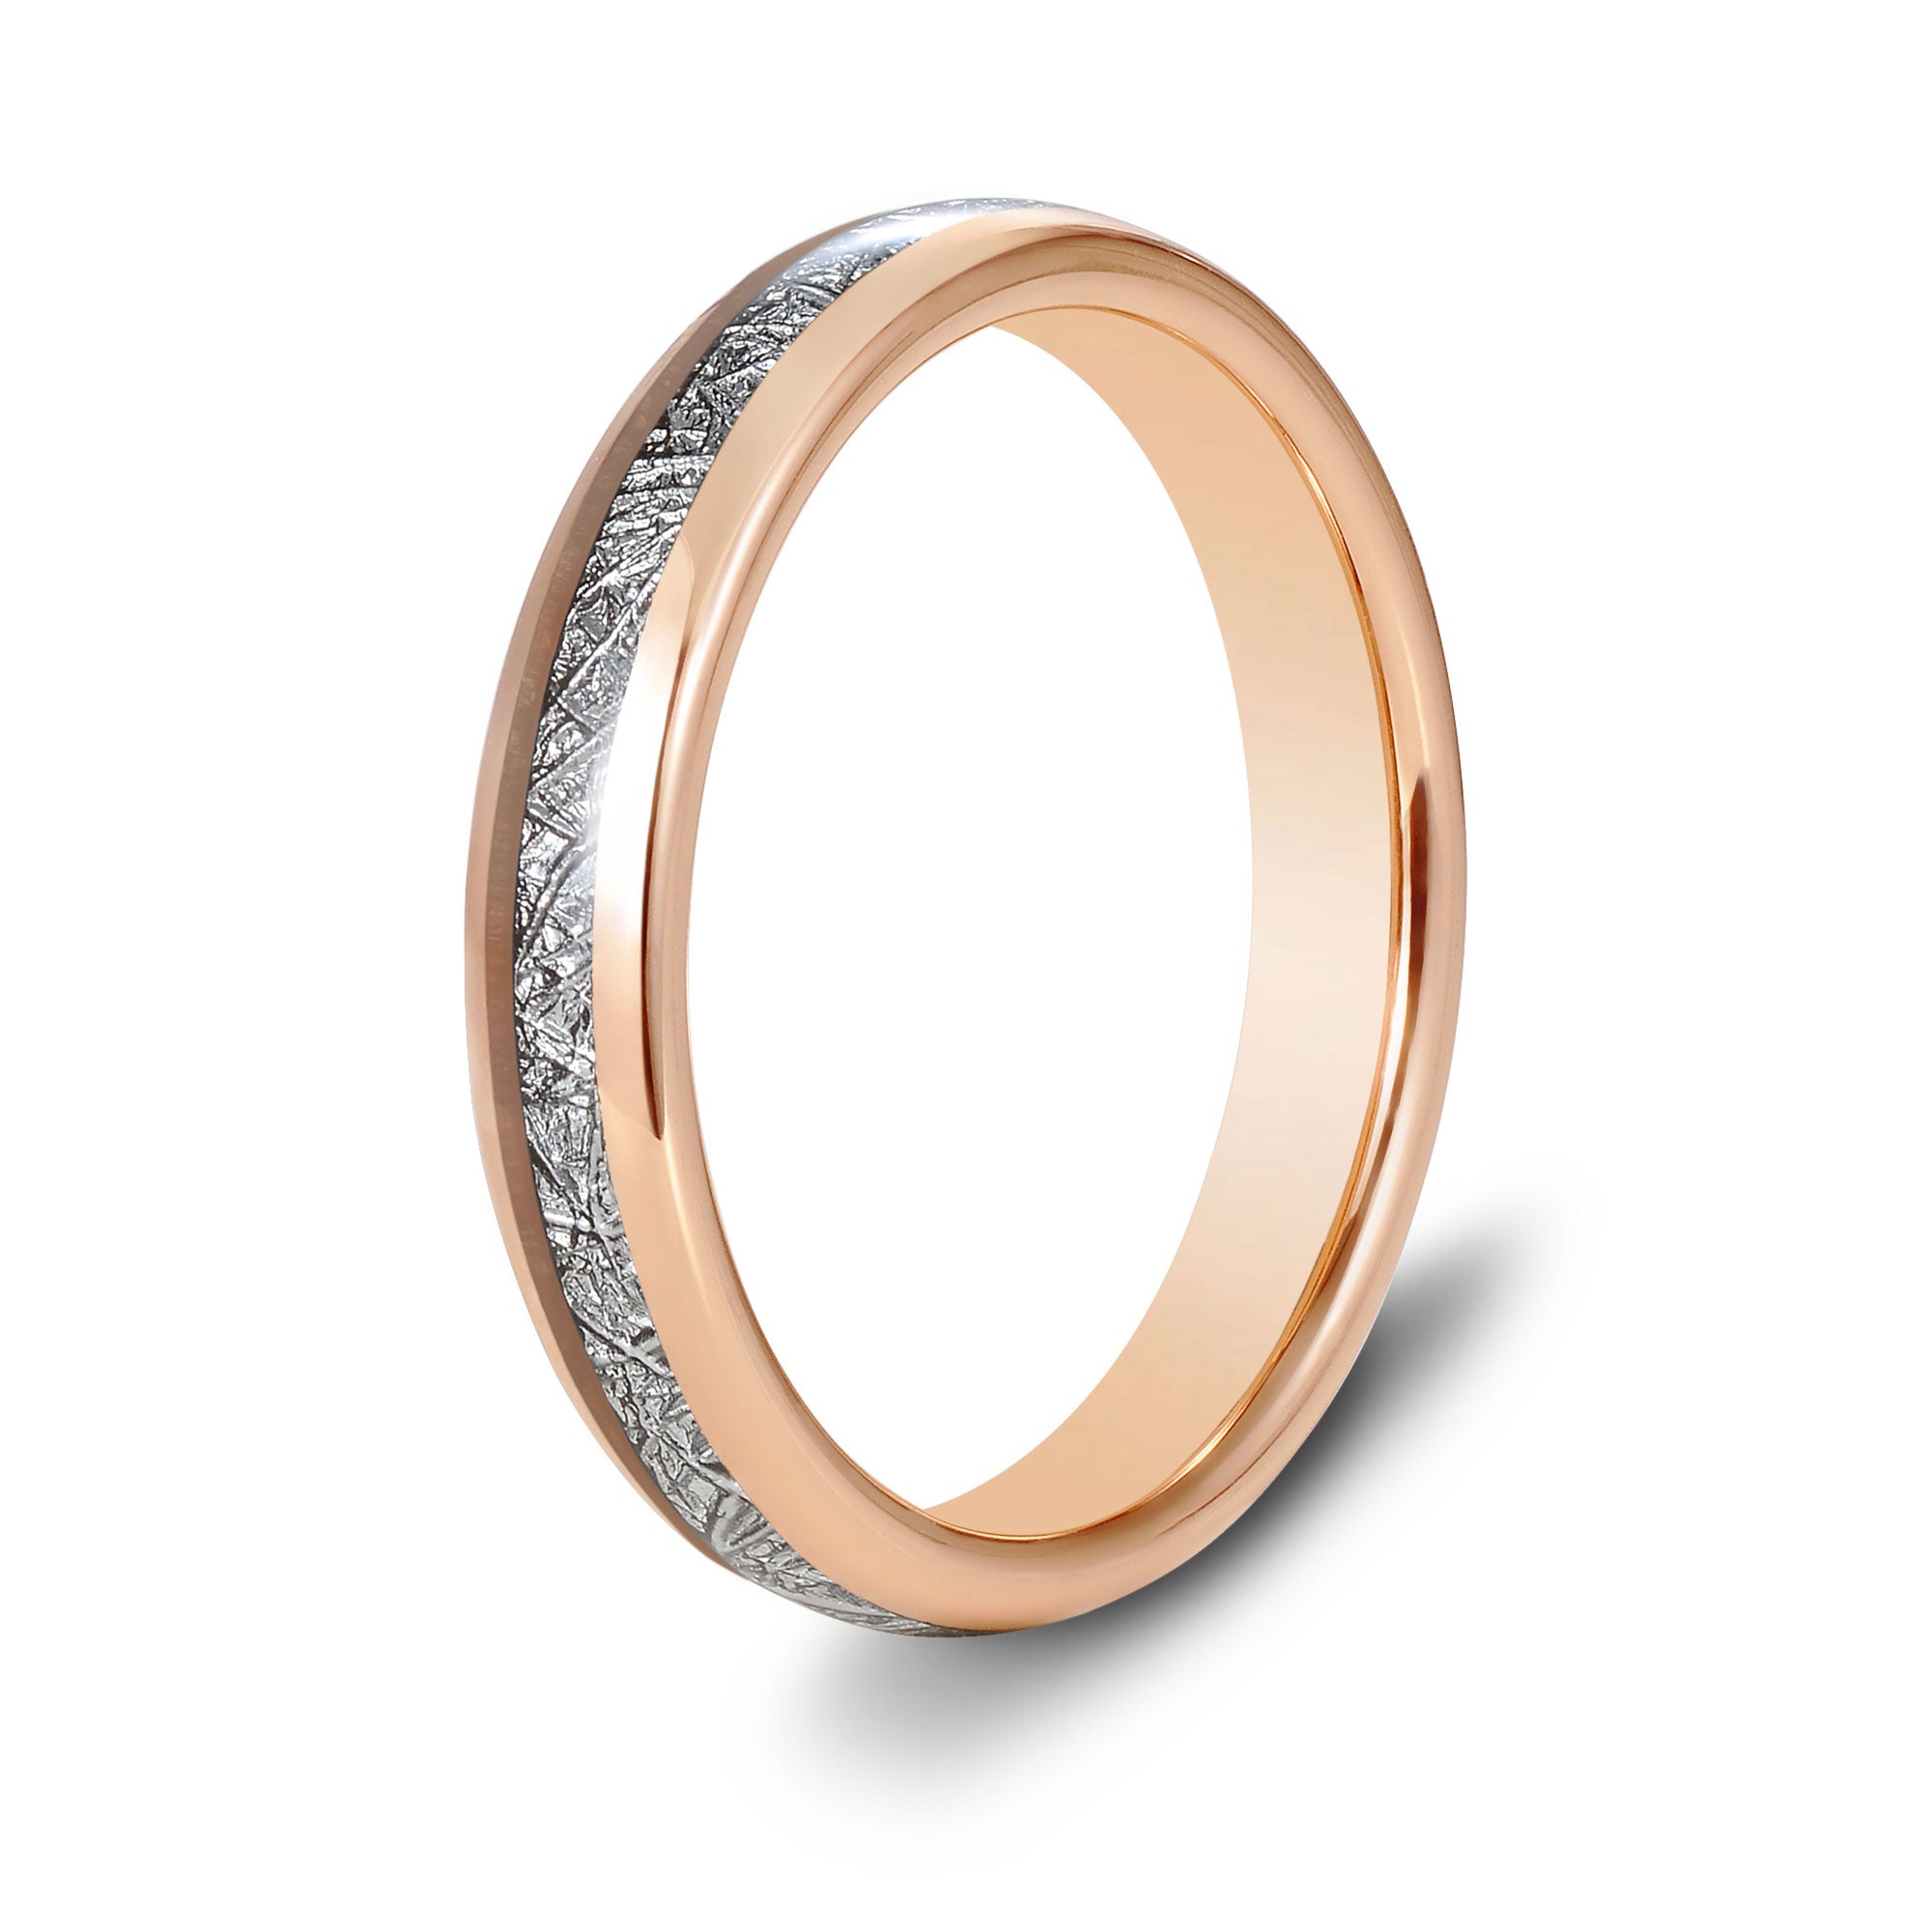 The Companion - Rose Gold 4mm Meteorite Tungsten Ring